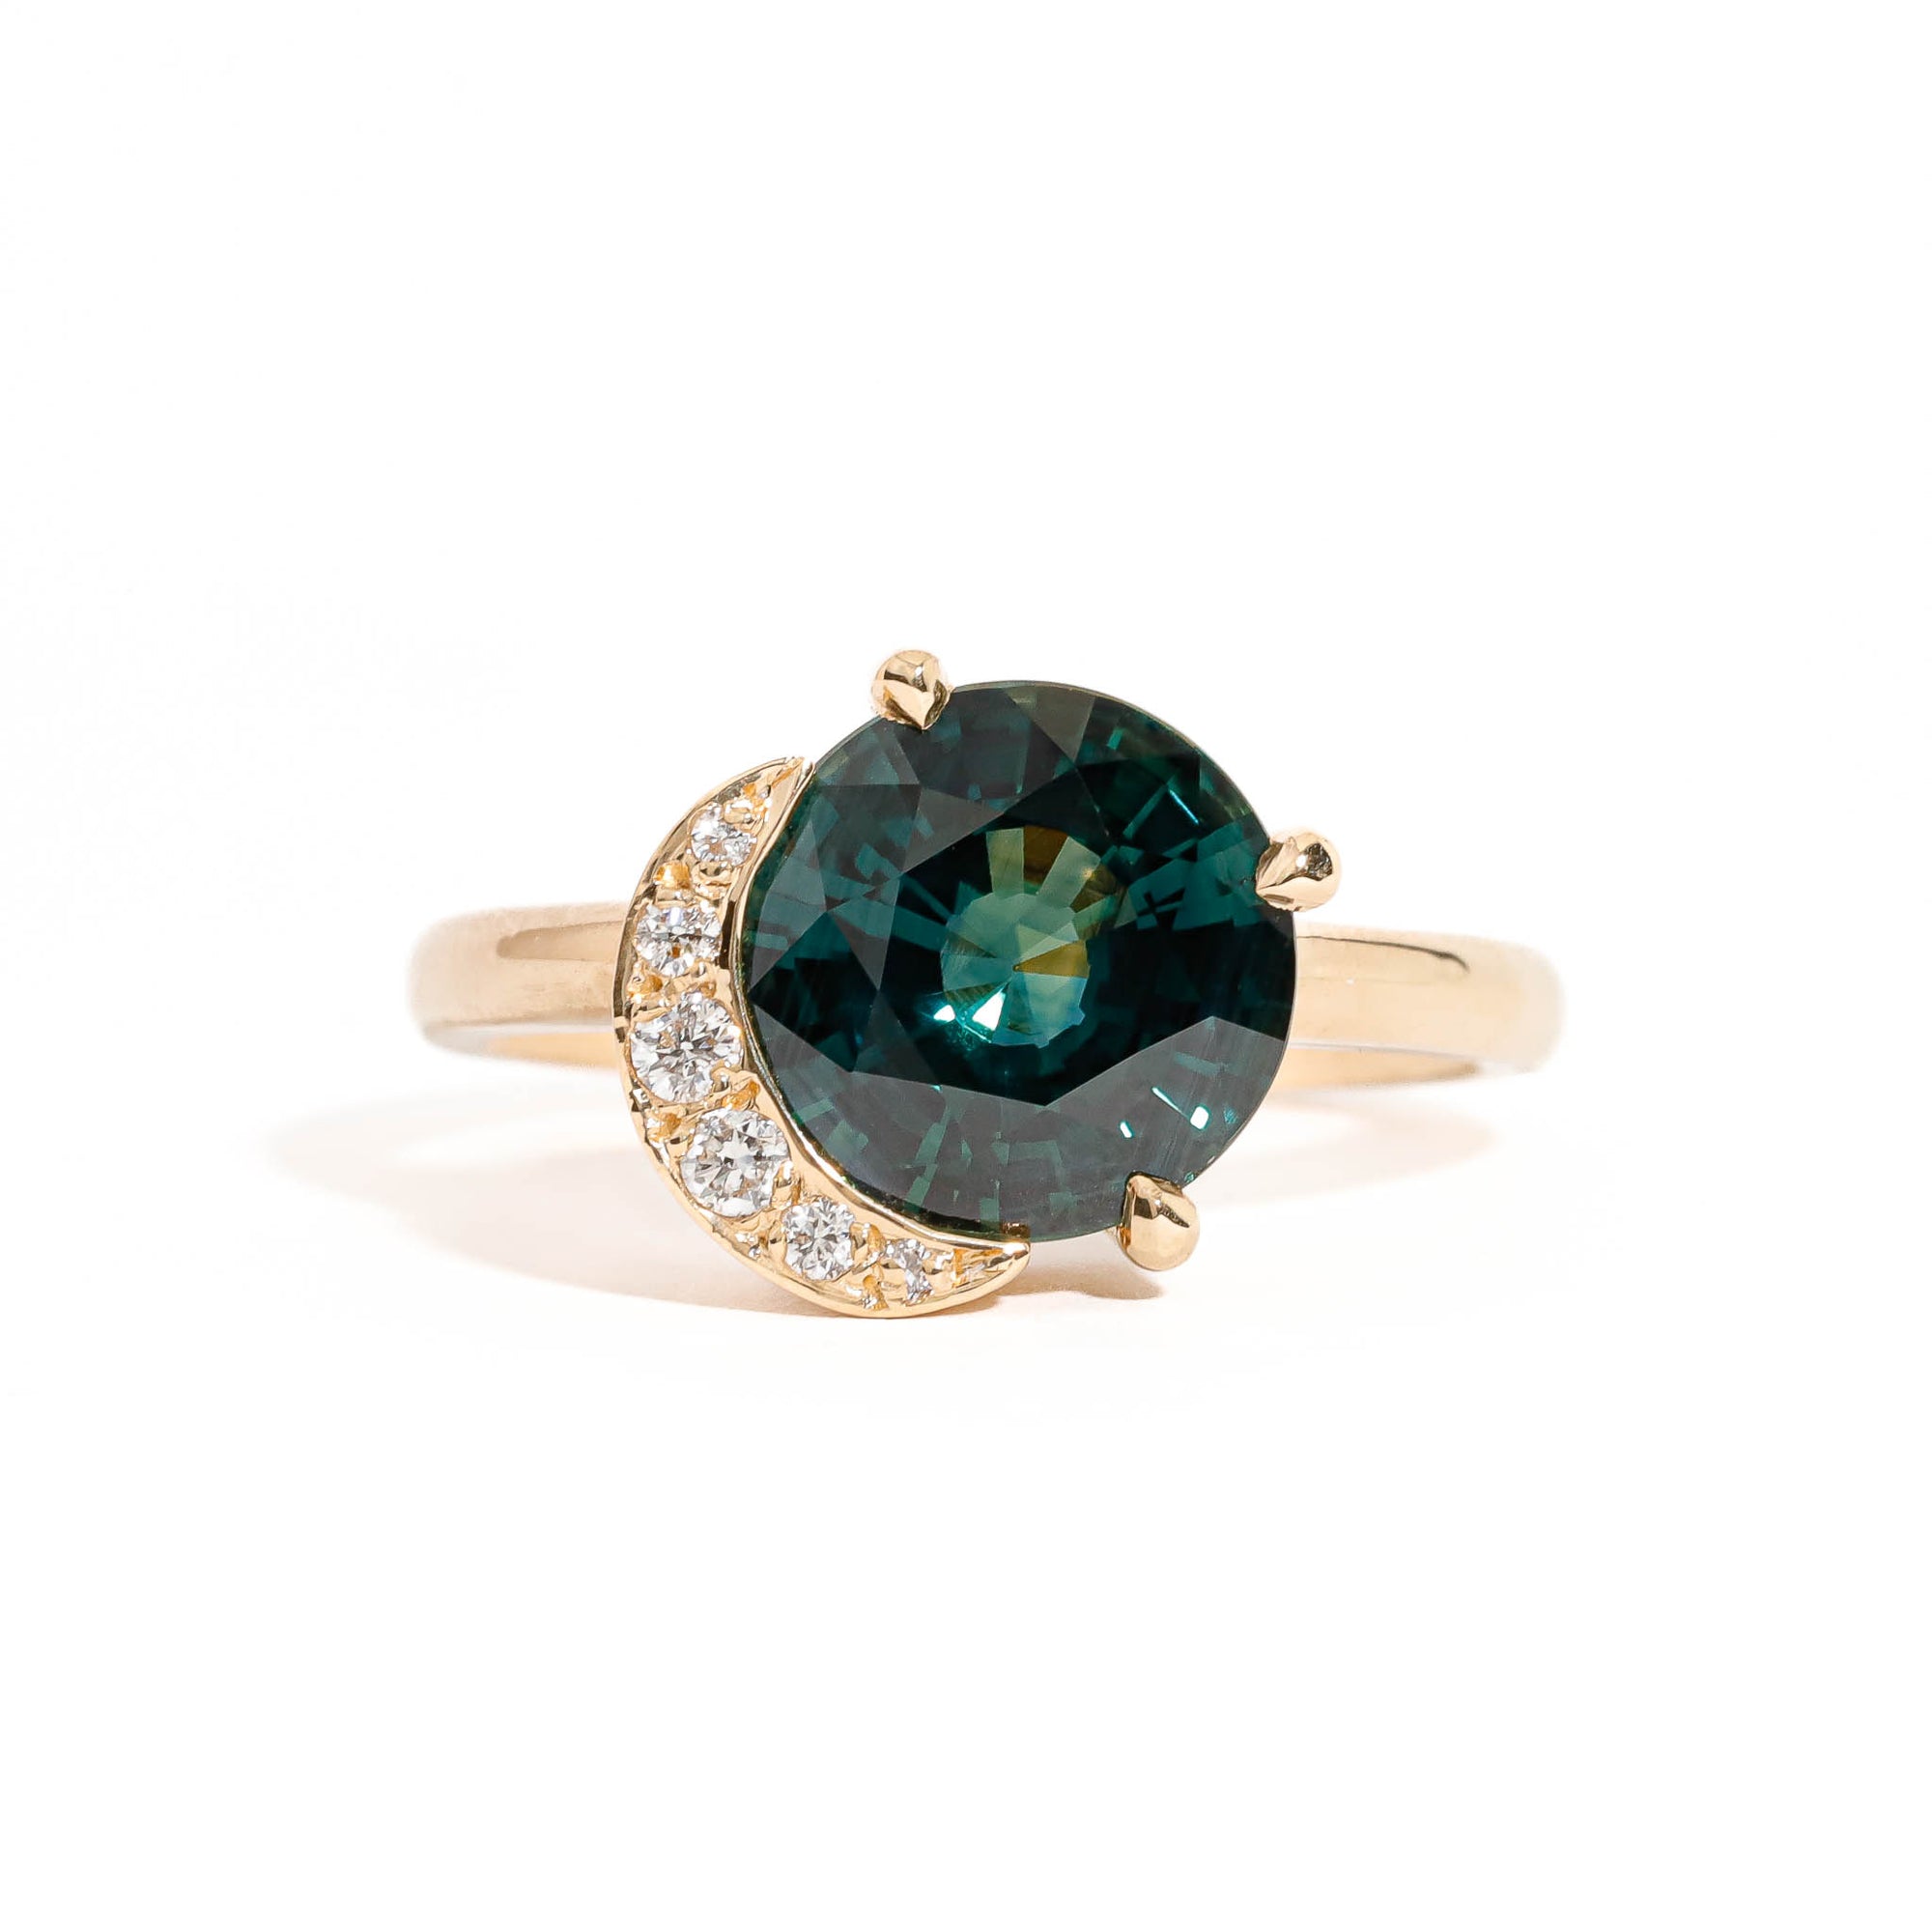  Round Brilliant Cut Teal Sapphire with Half Halo of White Diamonds in 18 Carat Yellow Gold